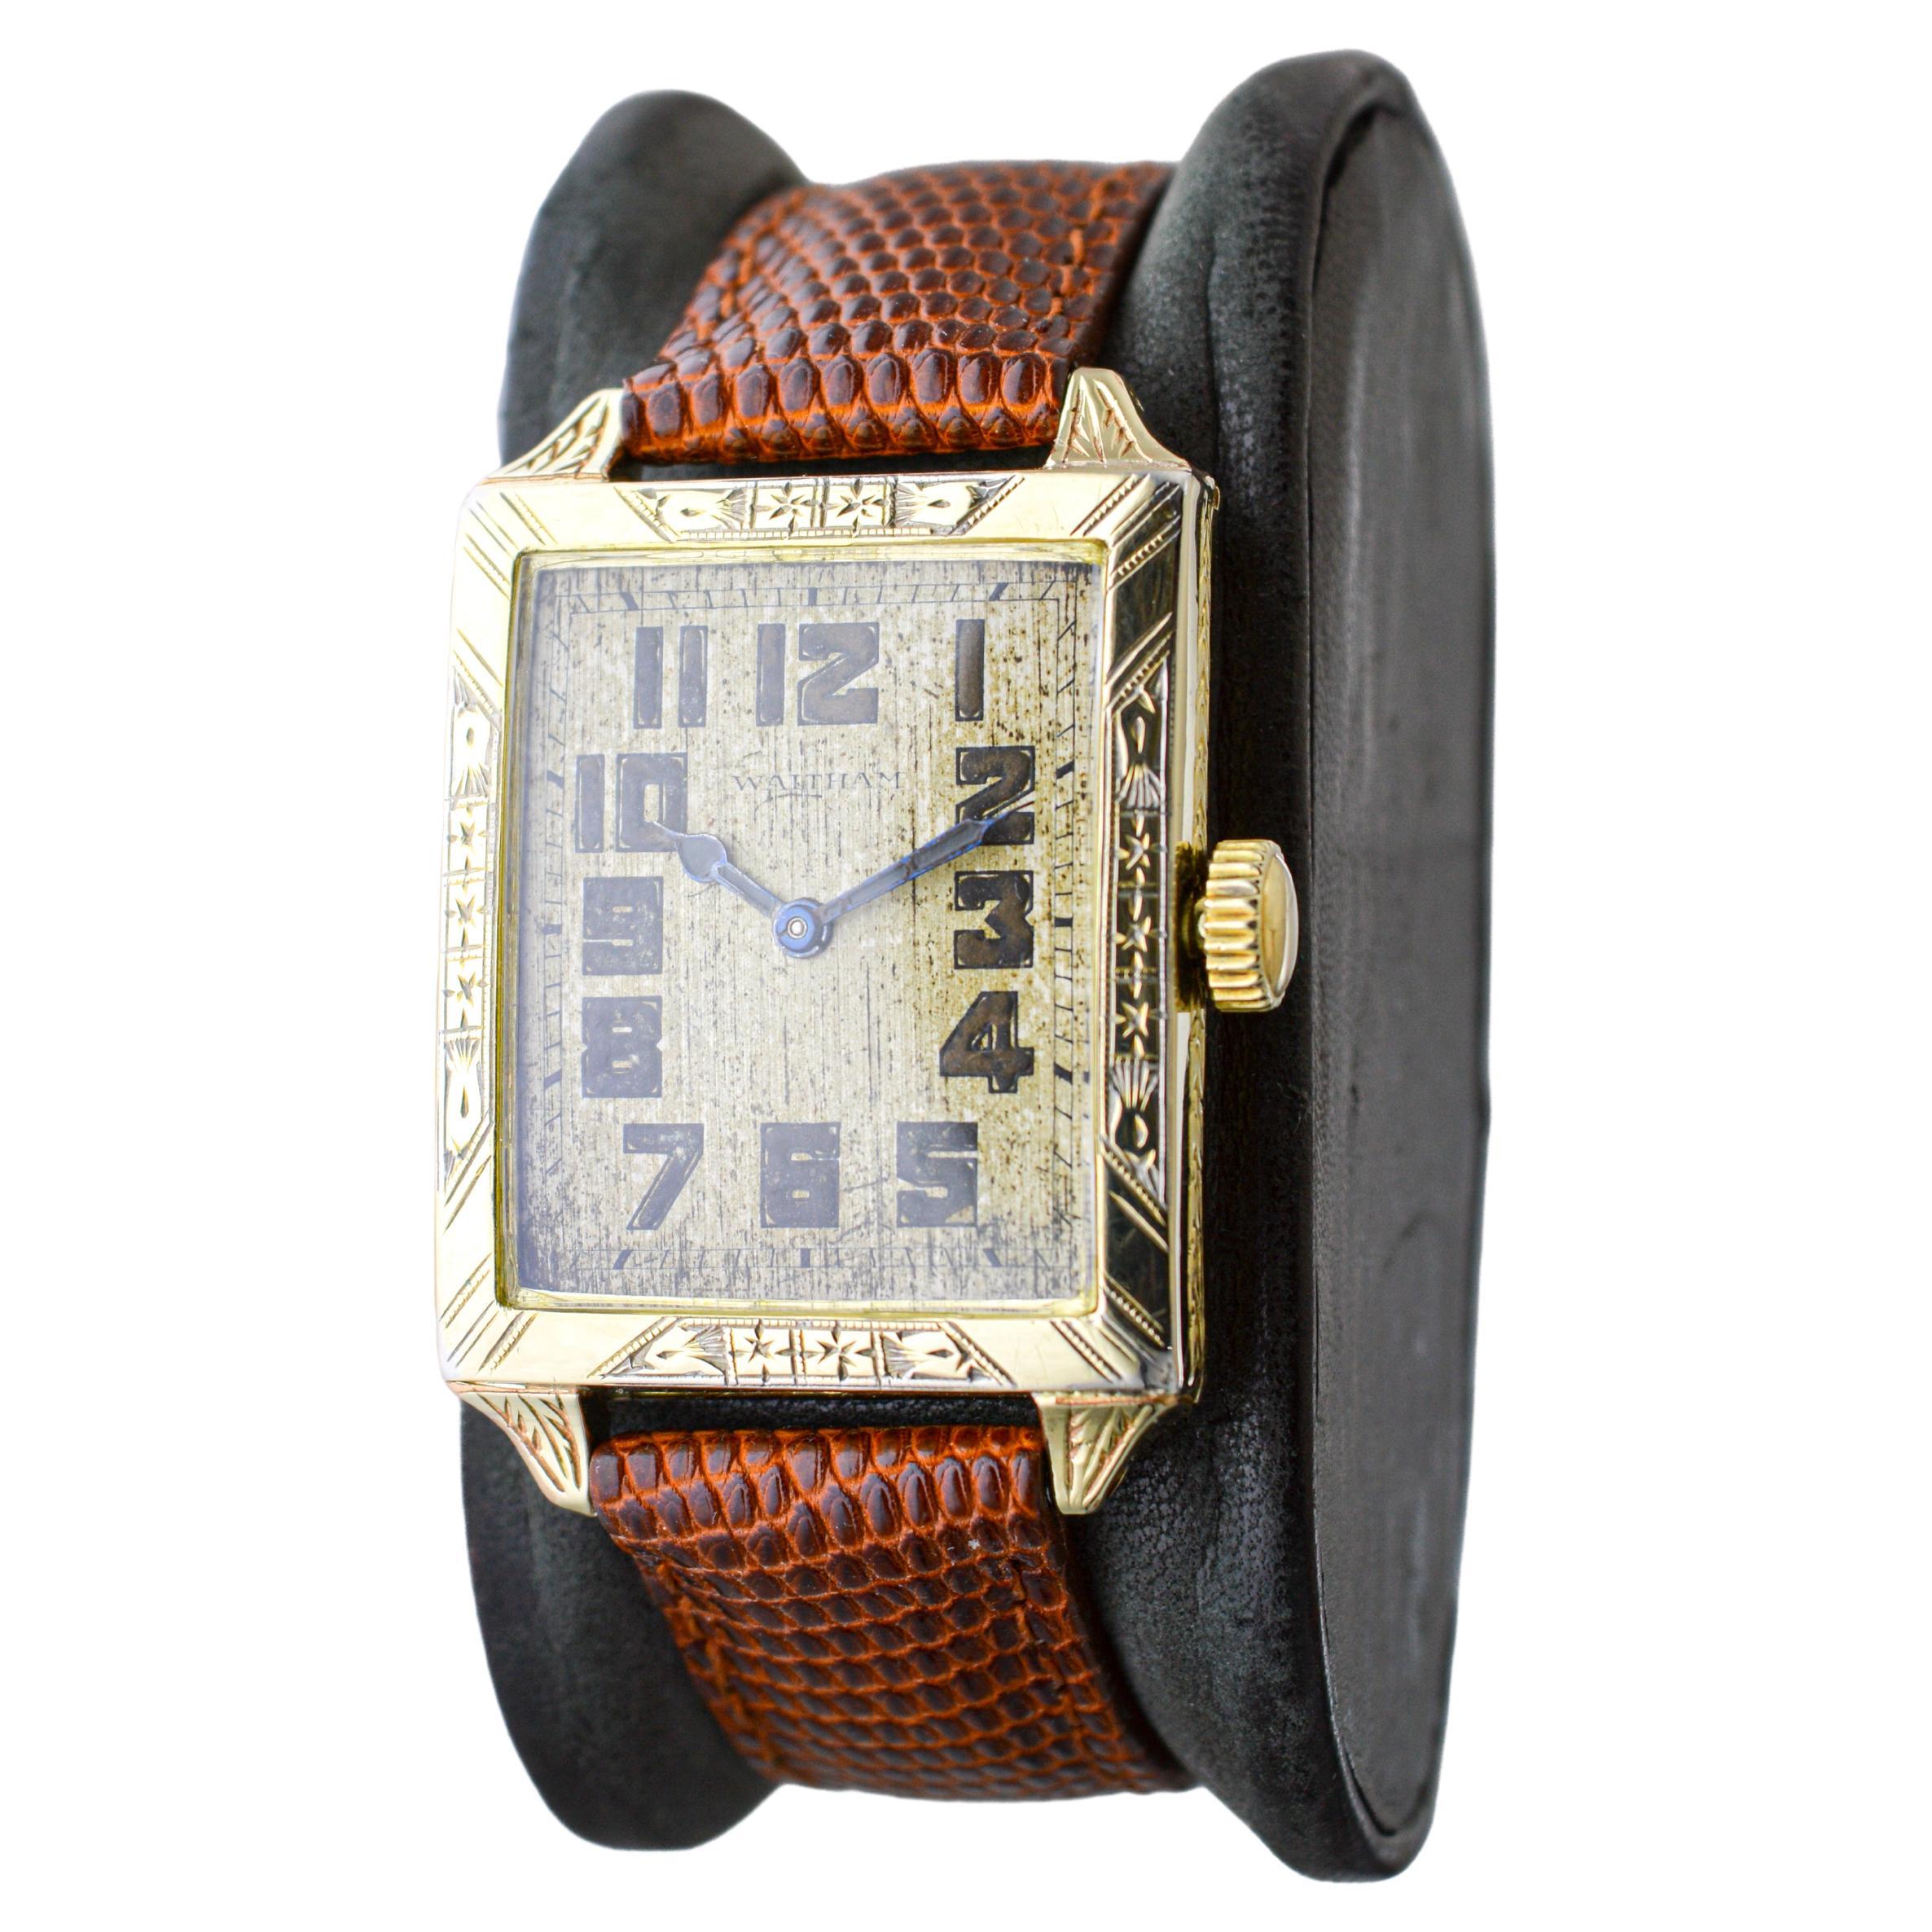 Waltham Yellow Gold Filled Art Deco Watch with Original Dial from 1926 For Sale 9